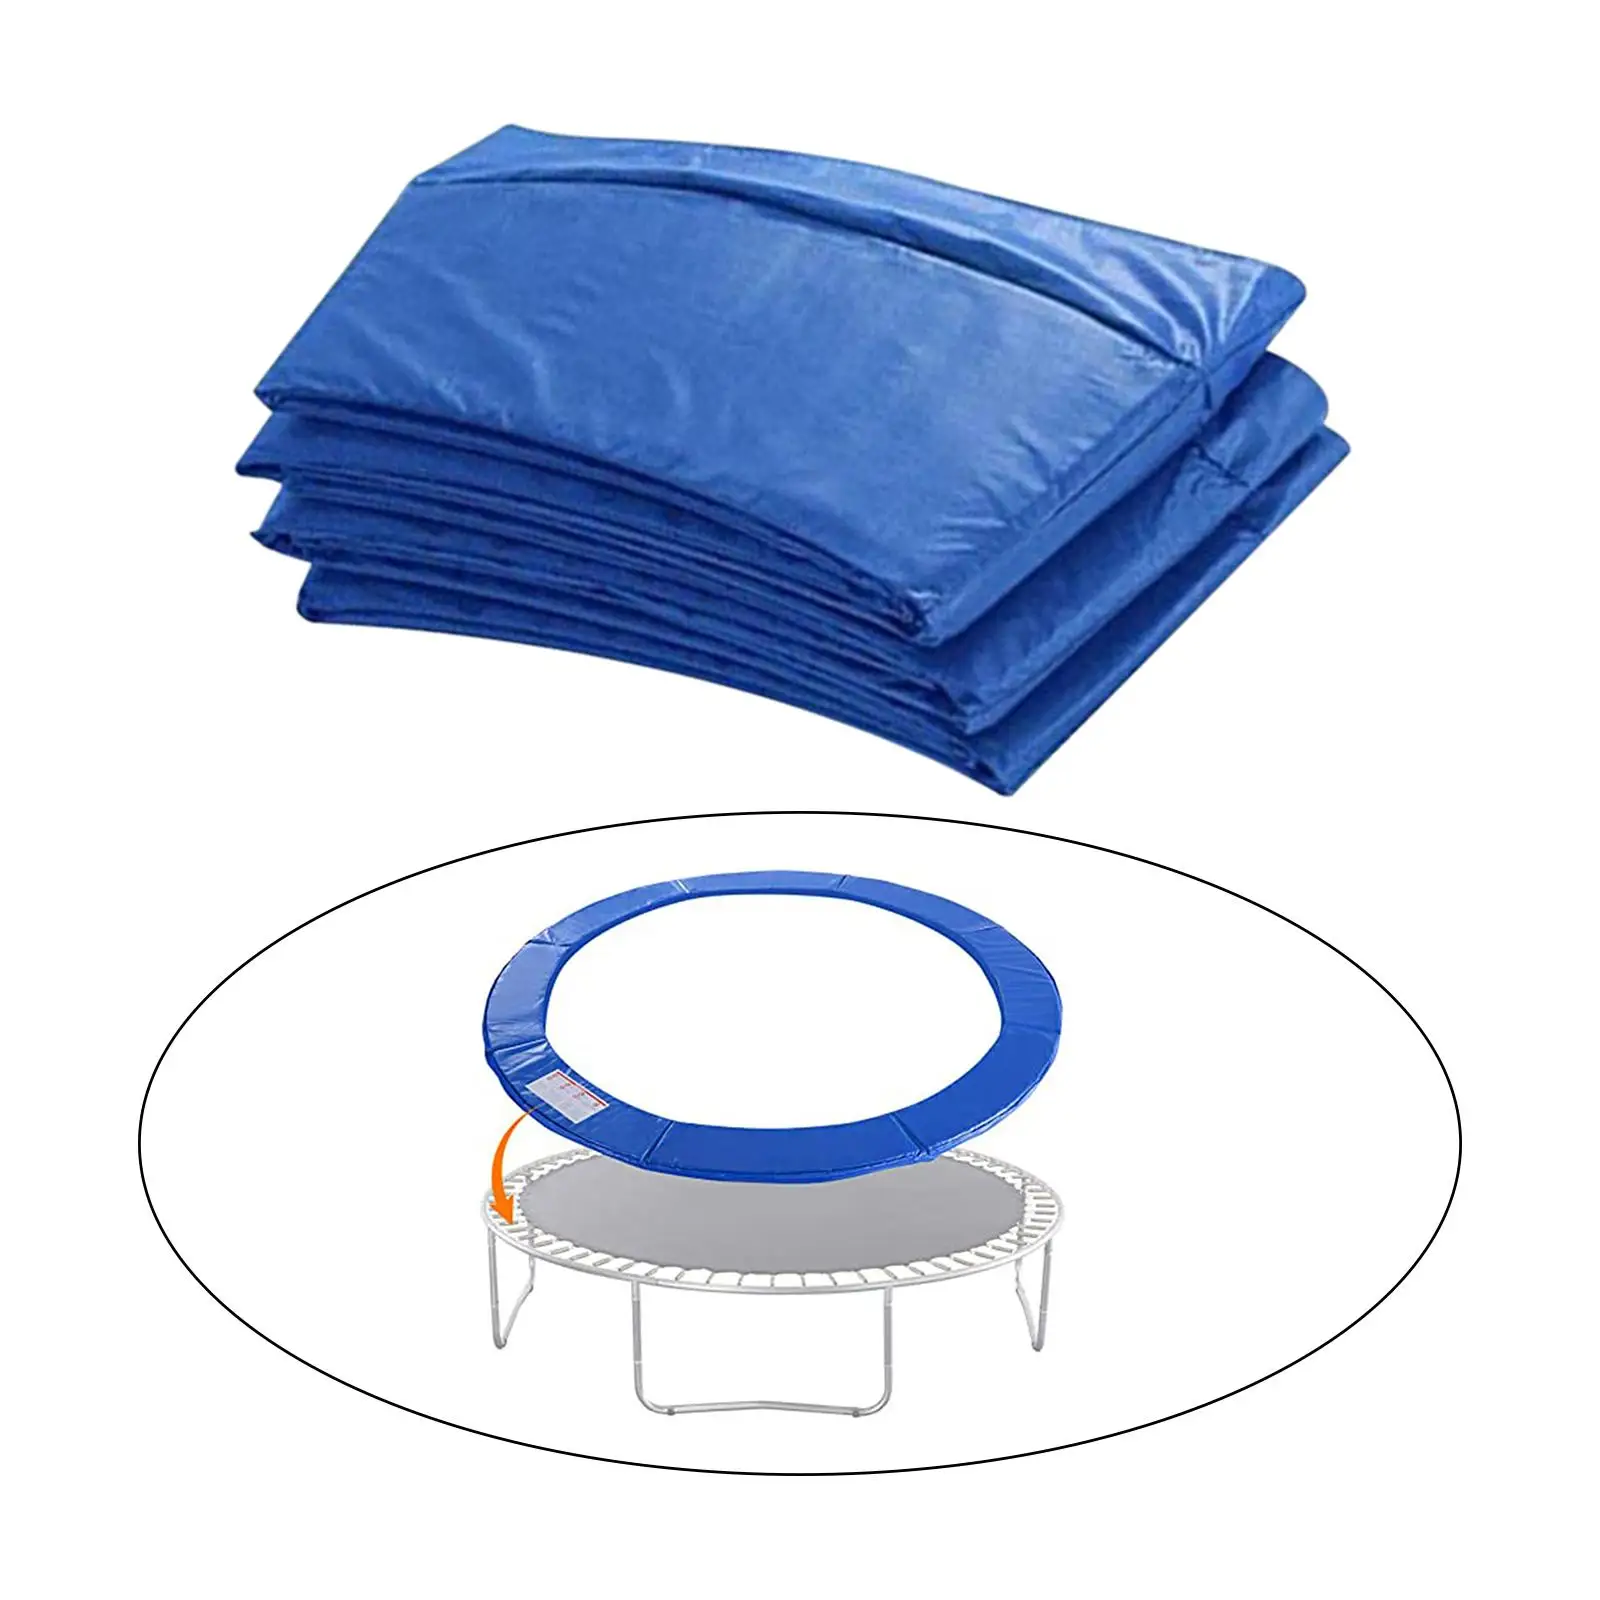 Trampoline Safety Pad Mat Replace Durable Fits Round Trampoline Frame 12ft Waterproof Tear Resistant No Hole for Pole Side Guard